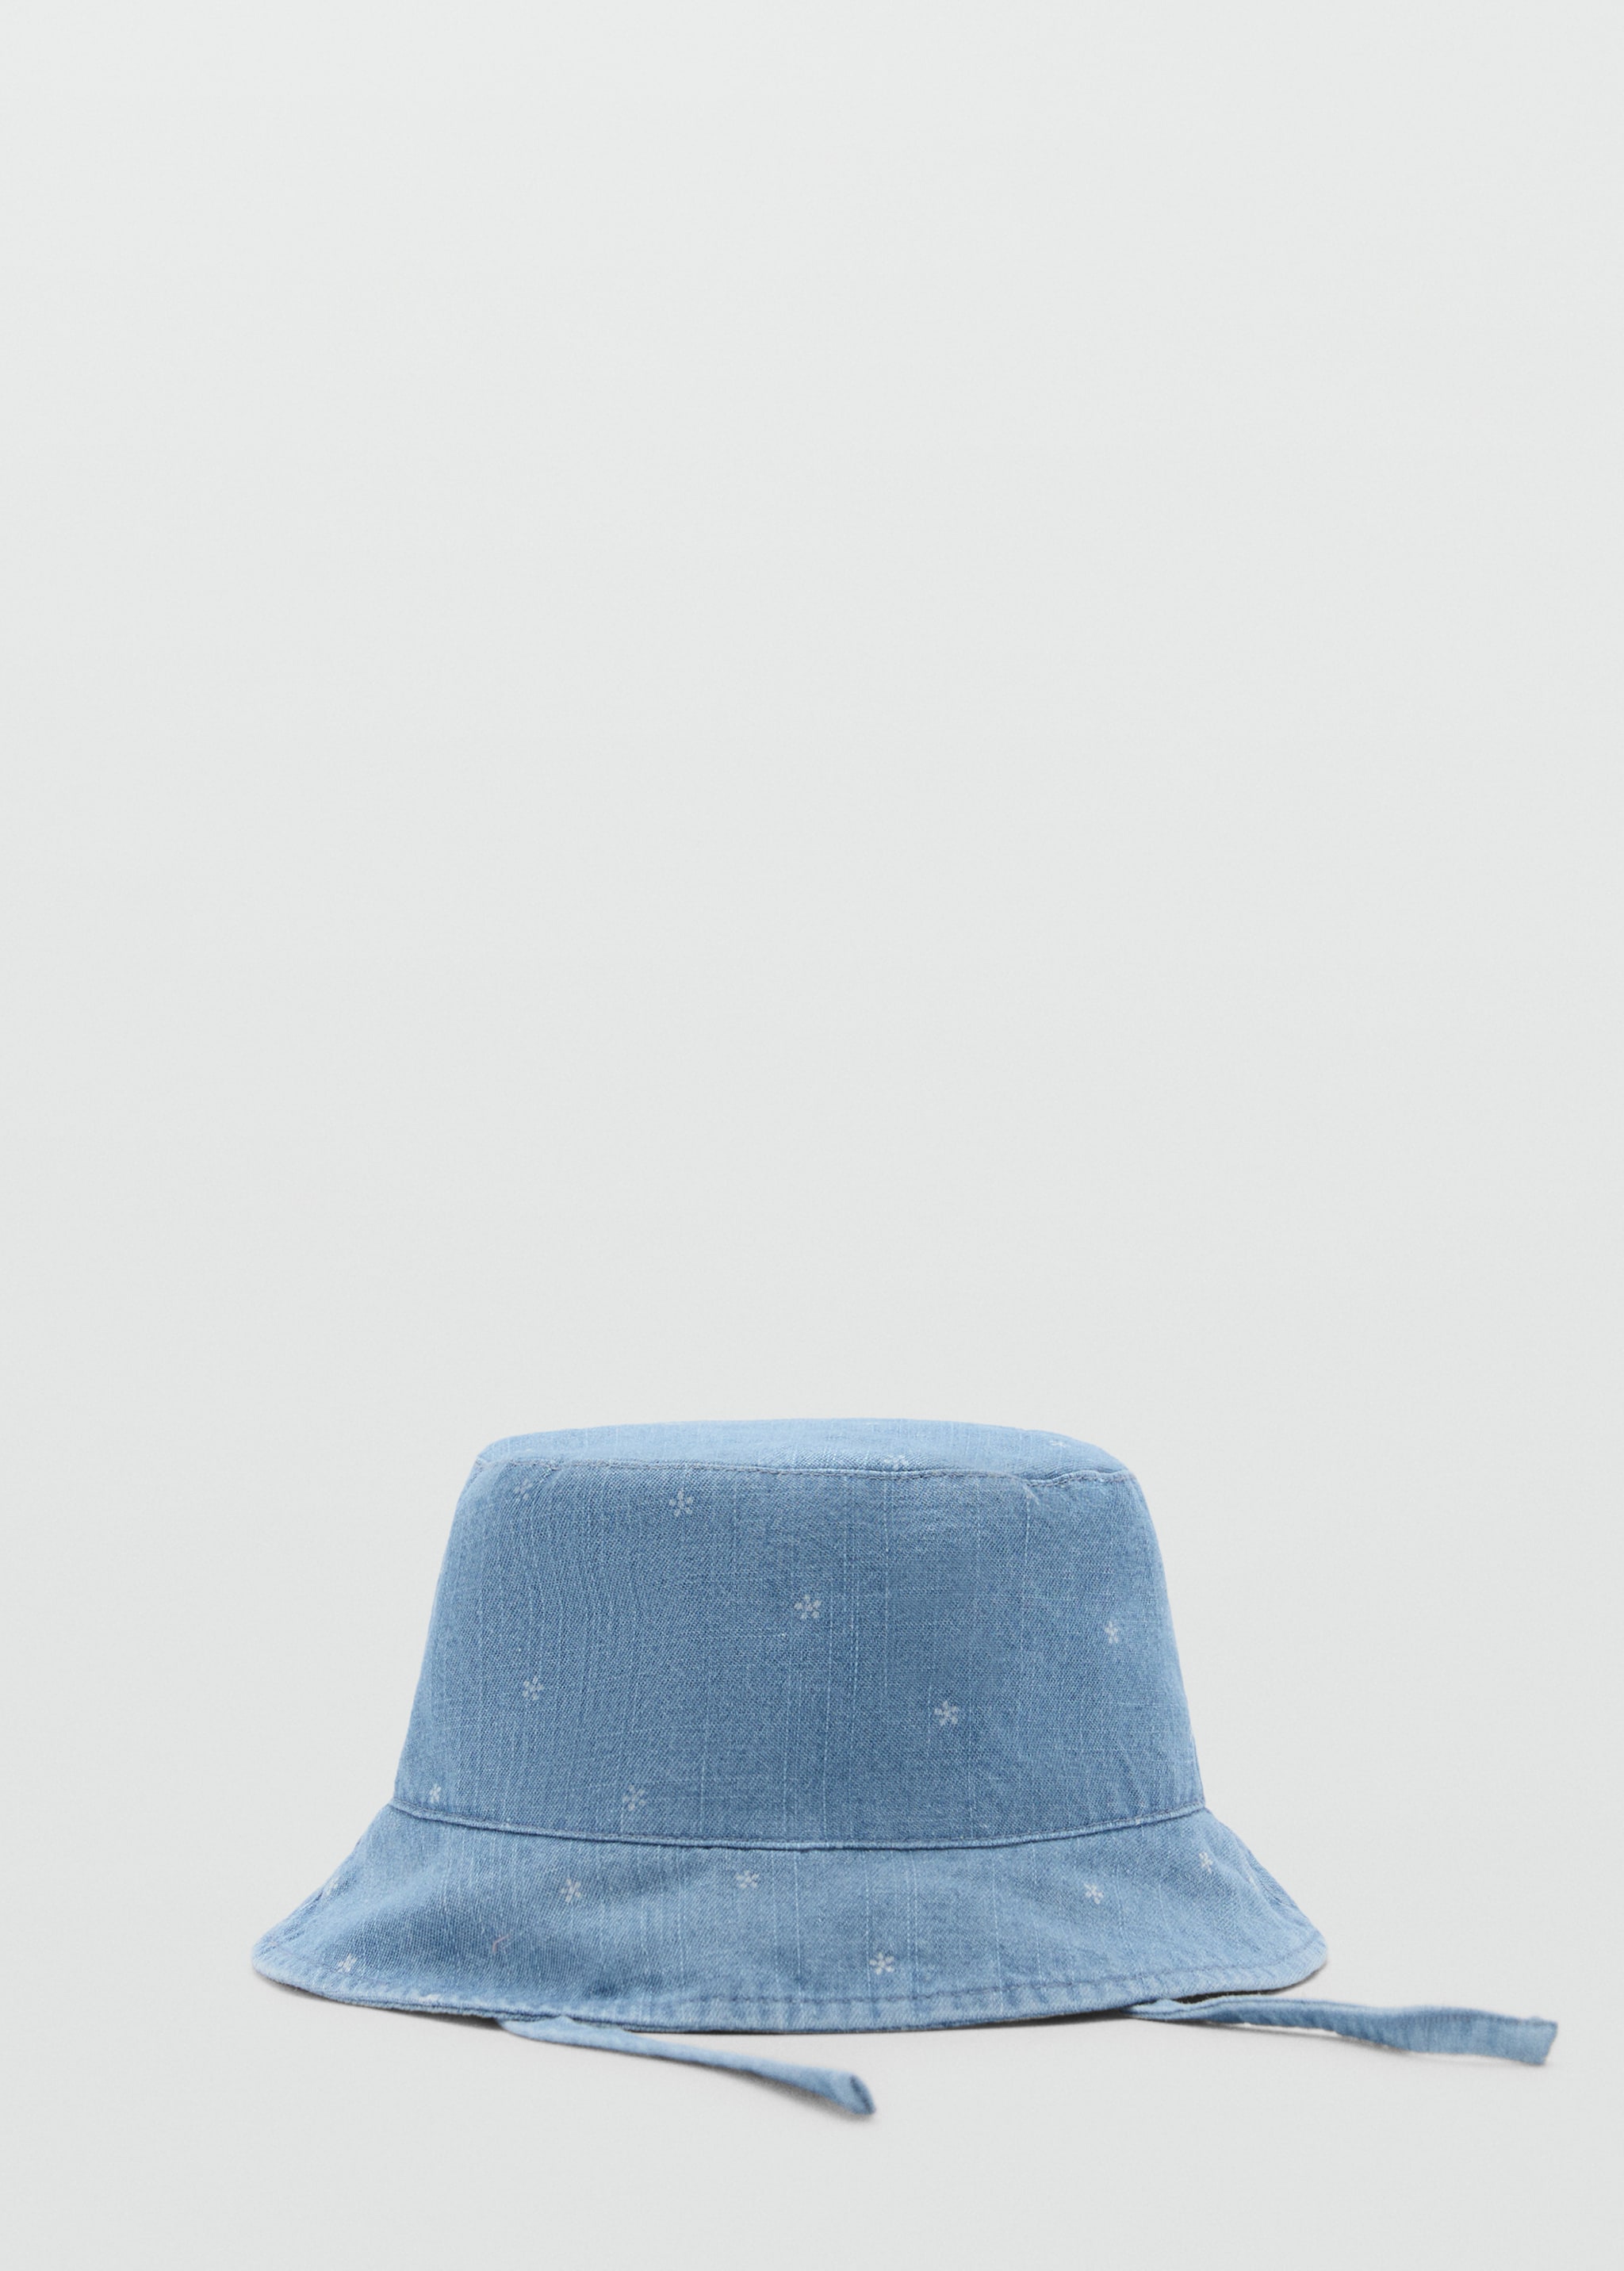 Bucket print hat - Article without model